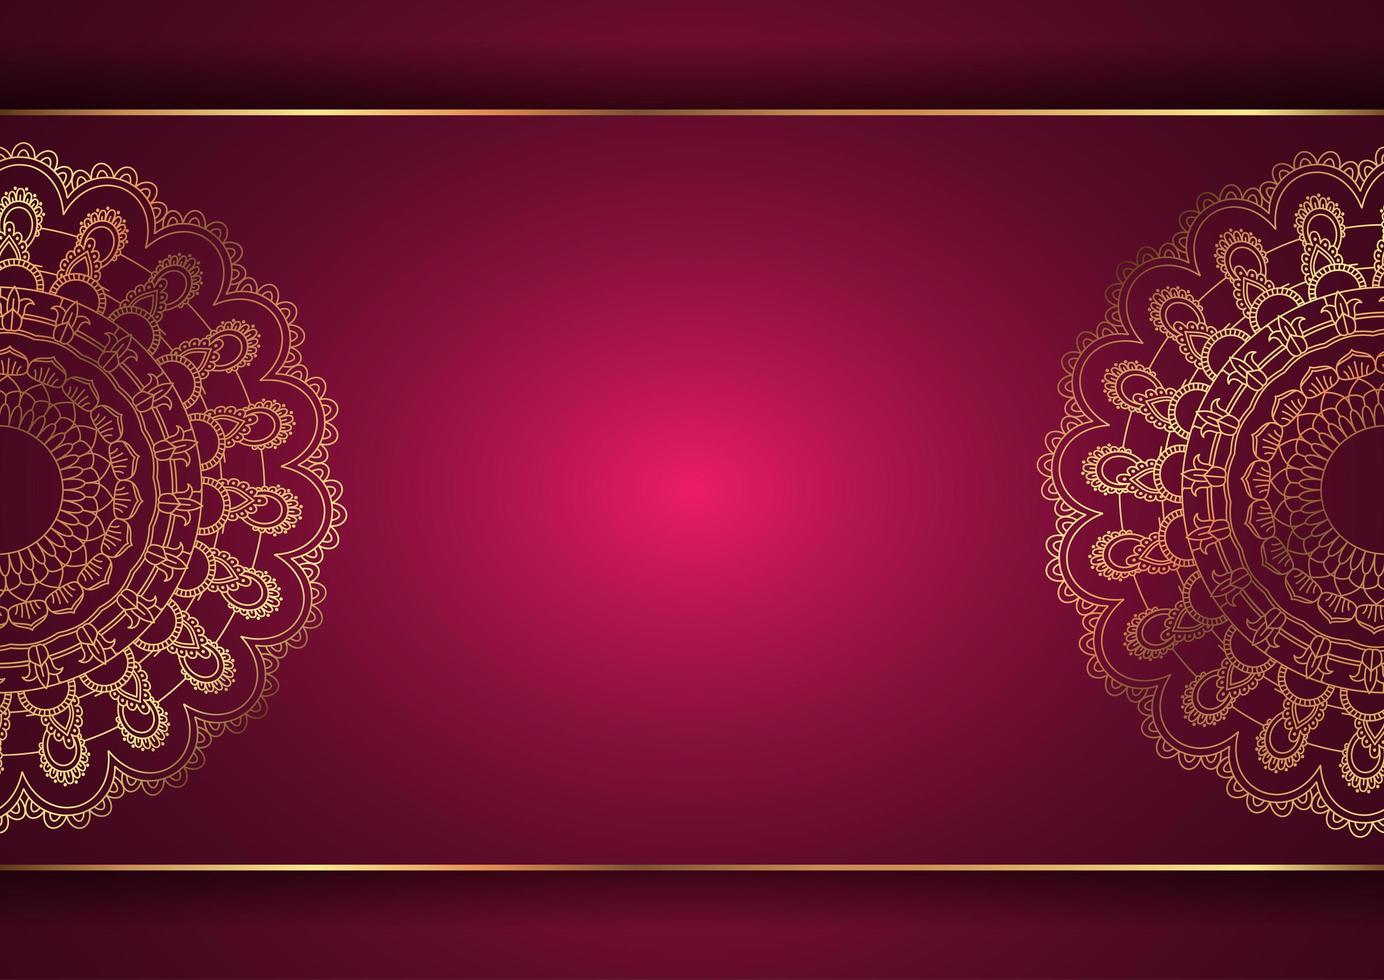 Gold decorative mandala on red background vector